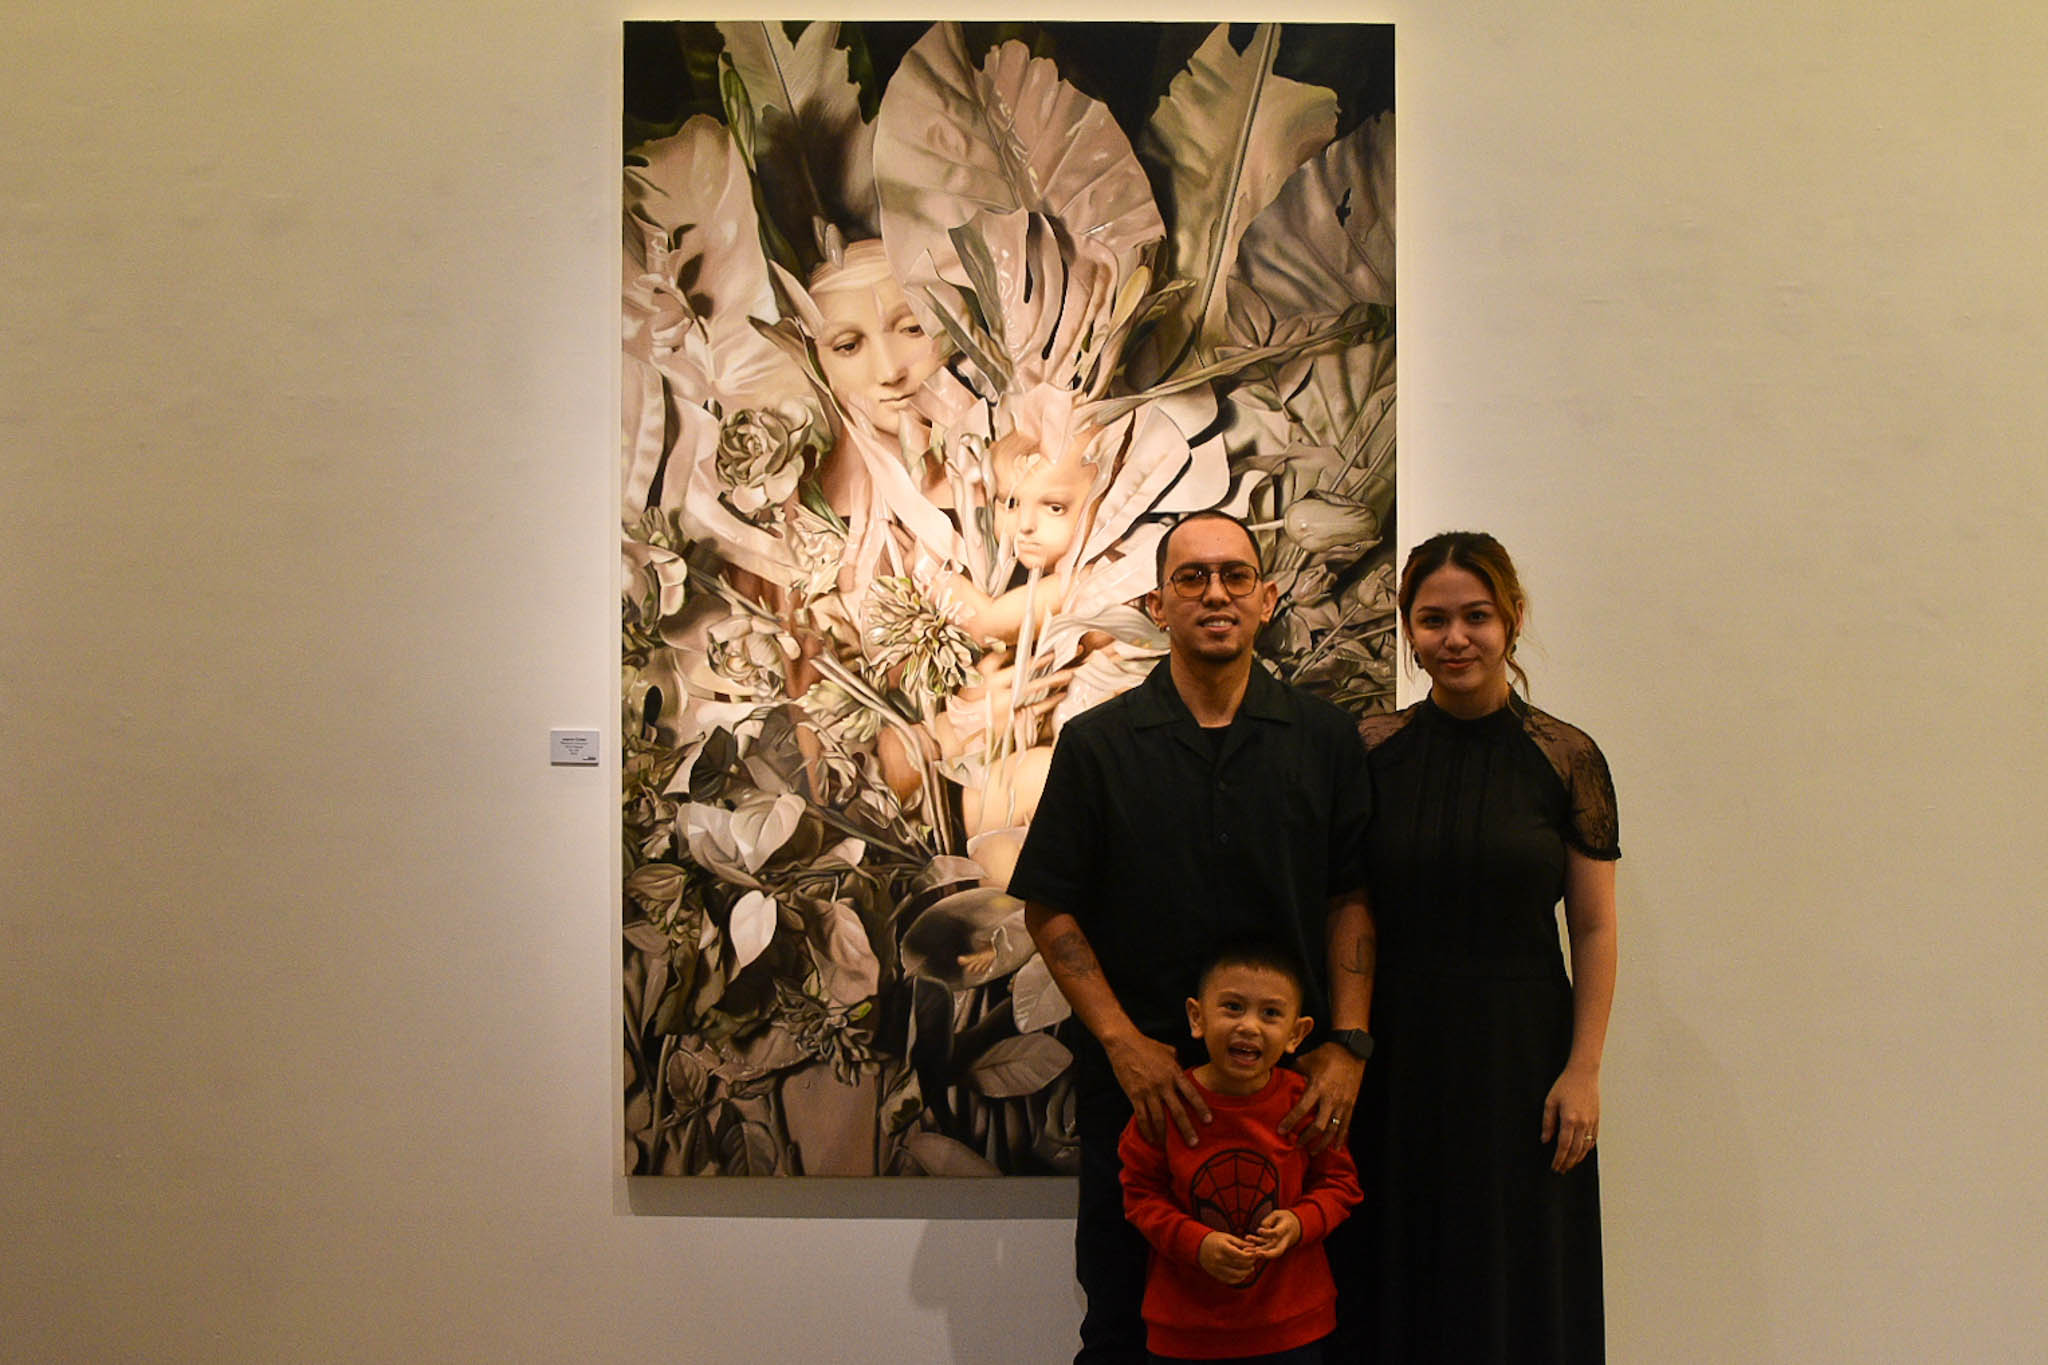 Artist Jayson Cortez with his wife and son